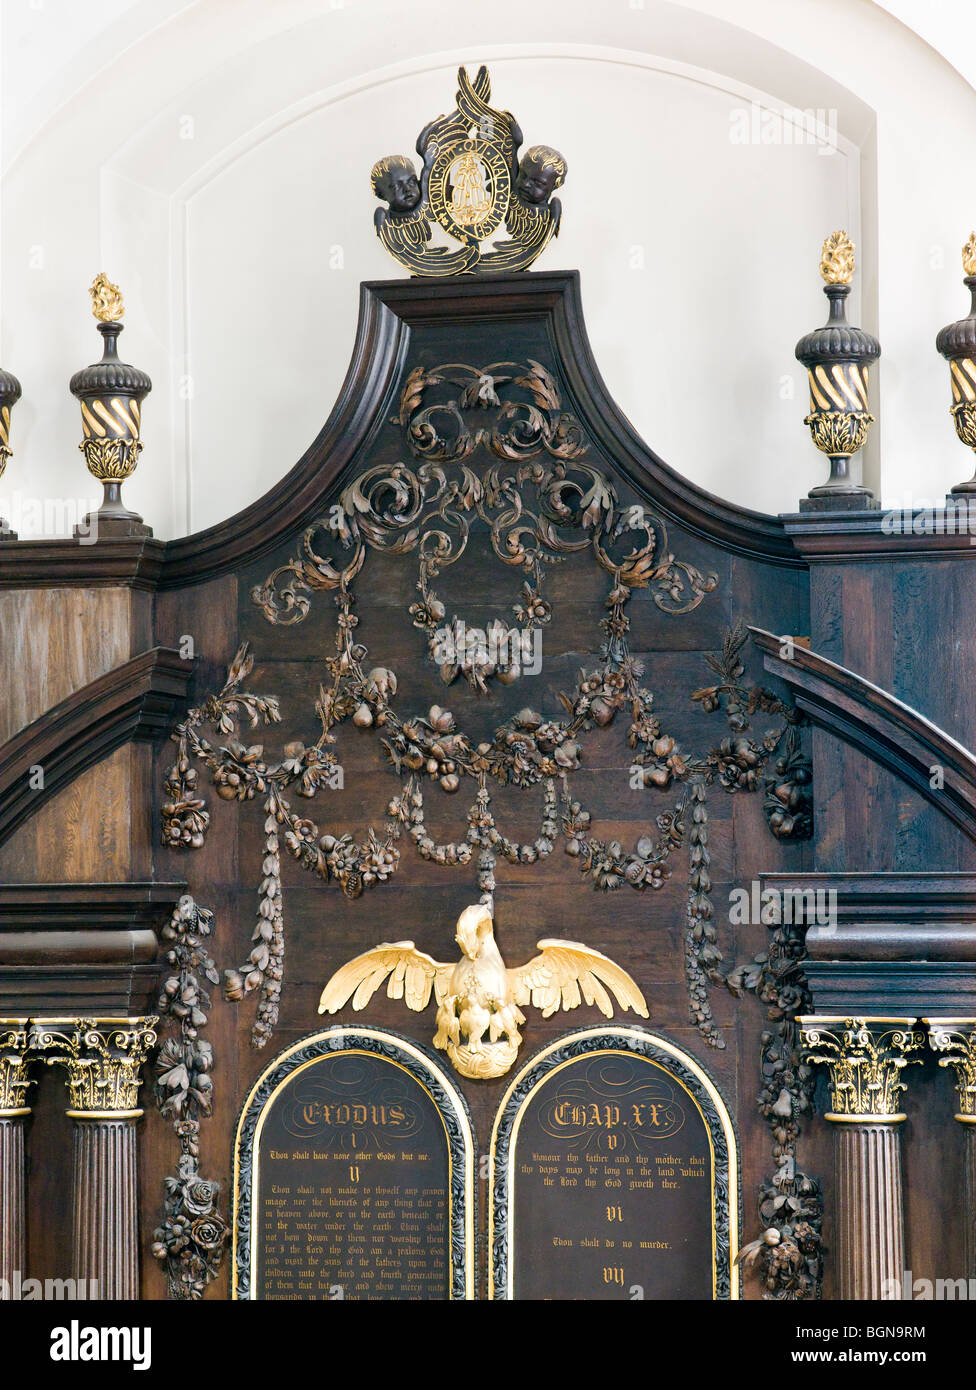 St Mary Abchurch London by  Sir Christopher Wren after Great Fire,  Grinling Gibbons carvings above altar with phoenix Stock Photo